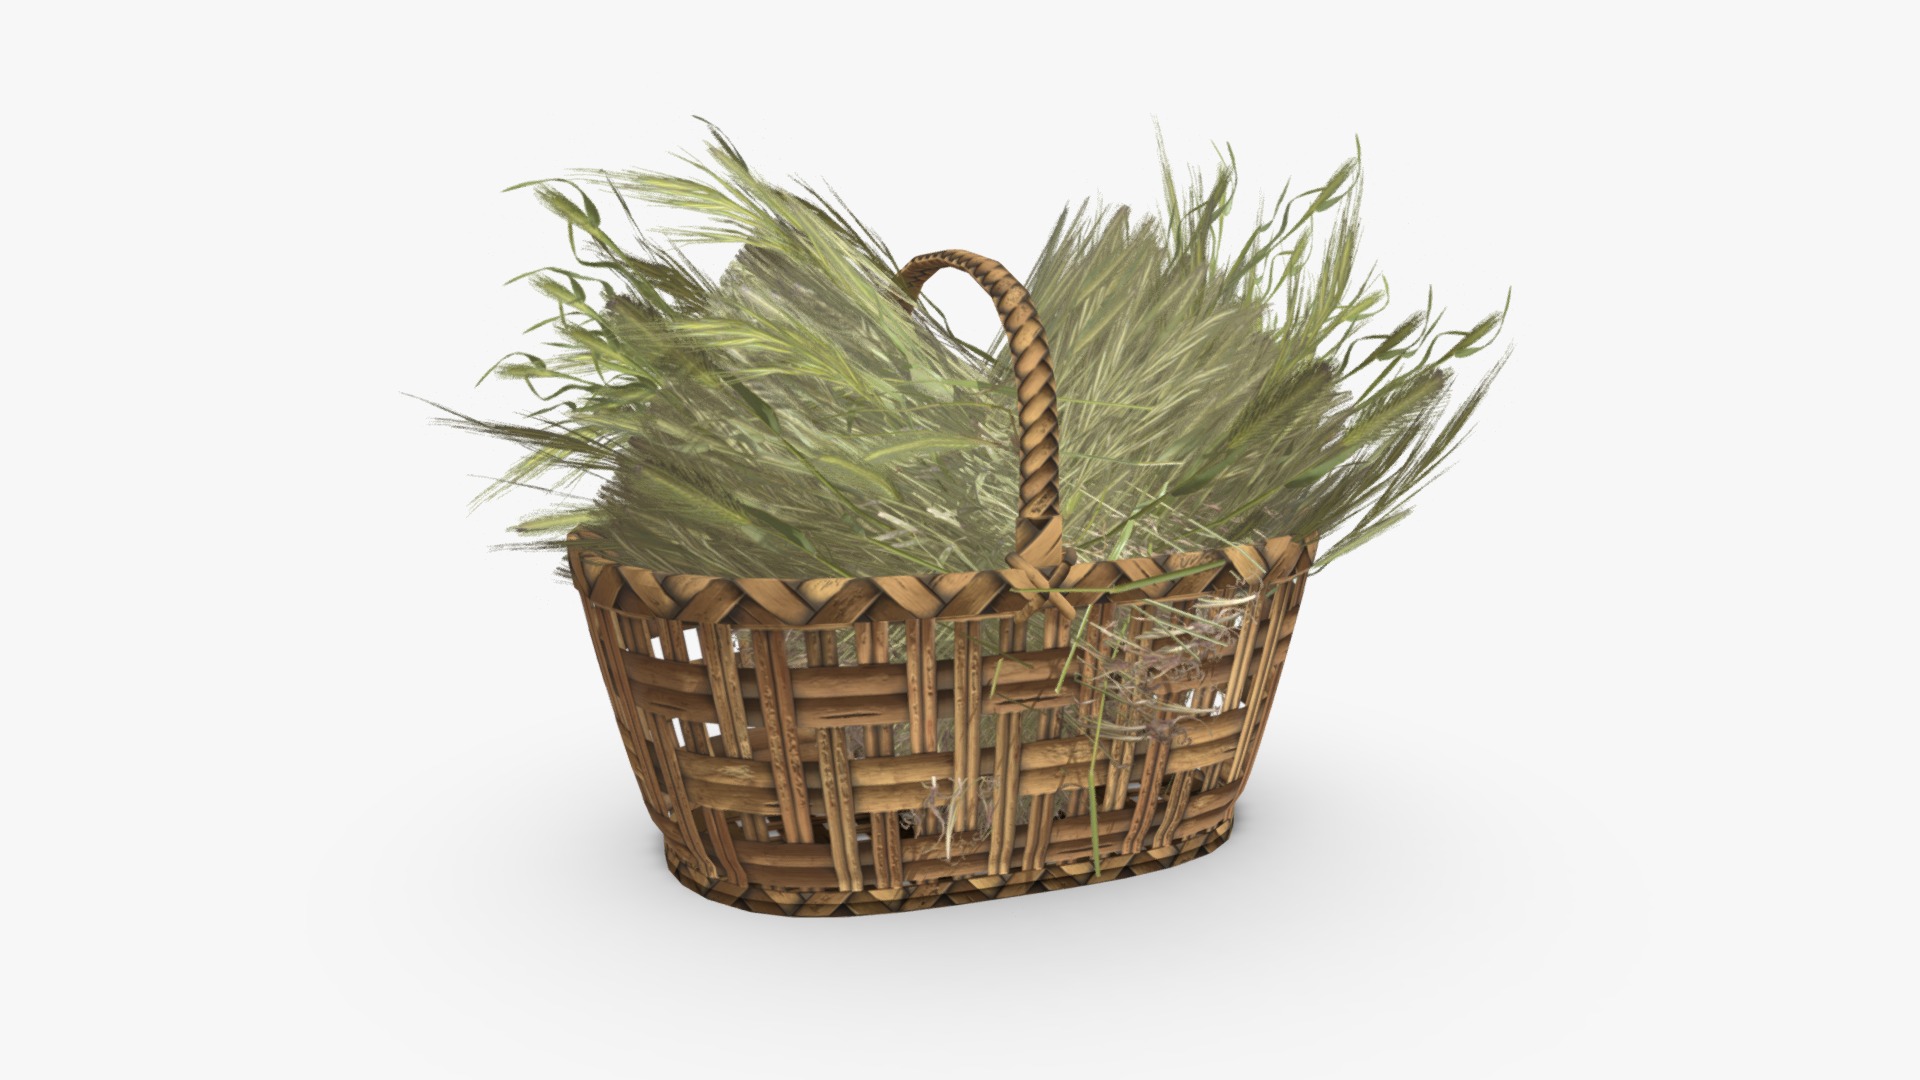 3D model Harvested Barley in a Wicker Basket - This is a 3D model of the Harvested Barley in a Wicker Basket. The 3D model is about a small wooden model of a pineapple.